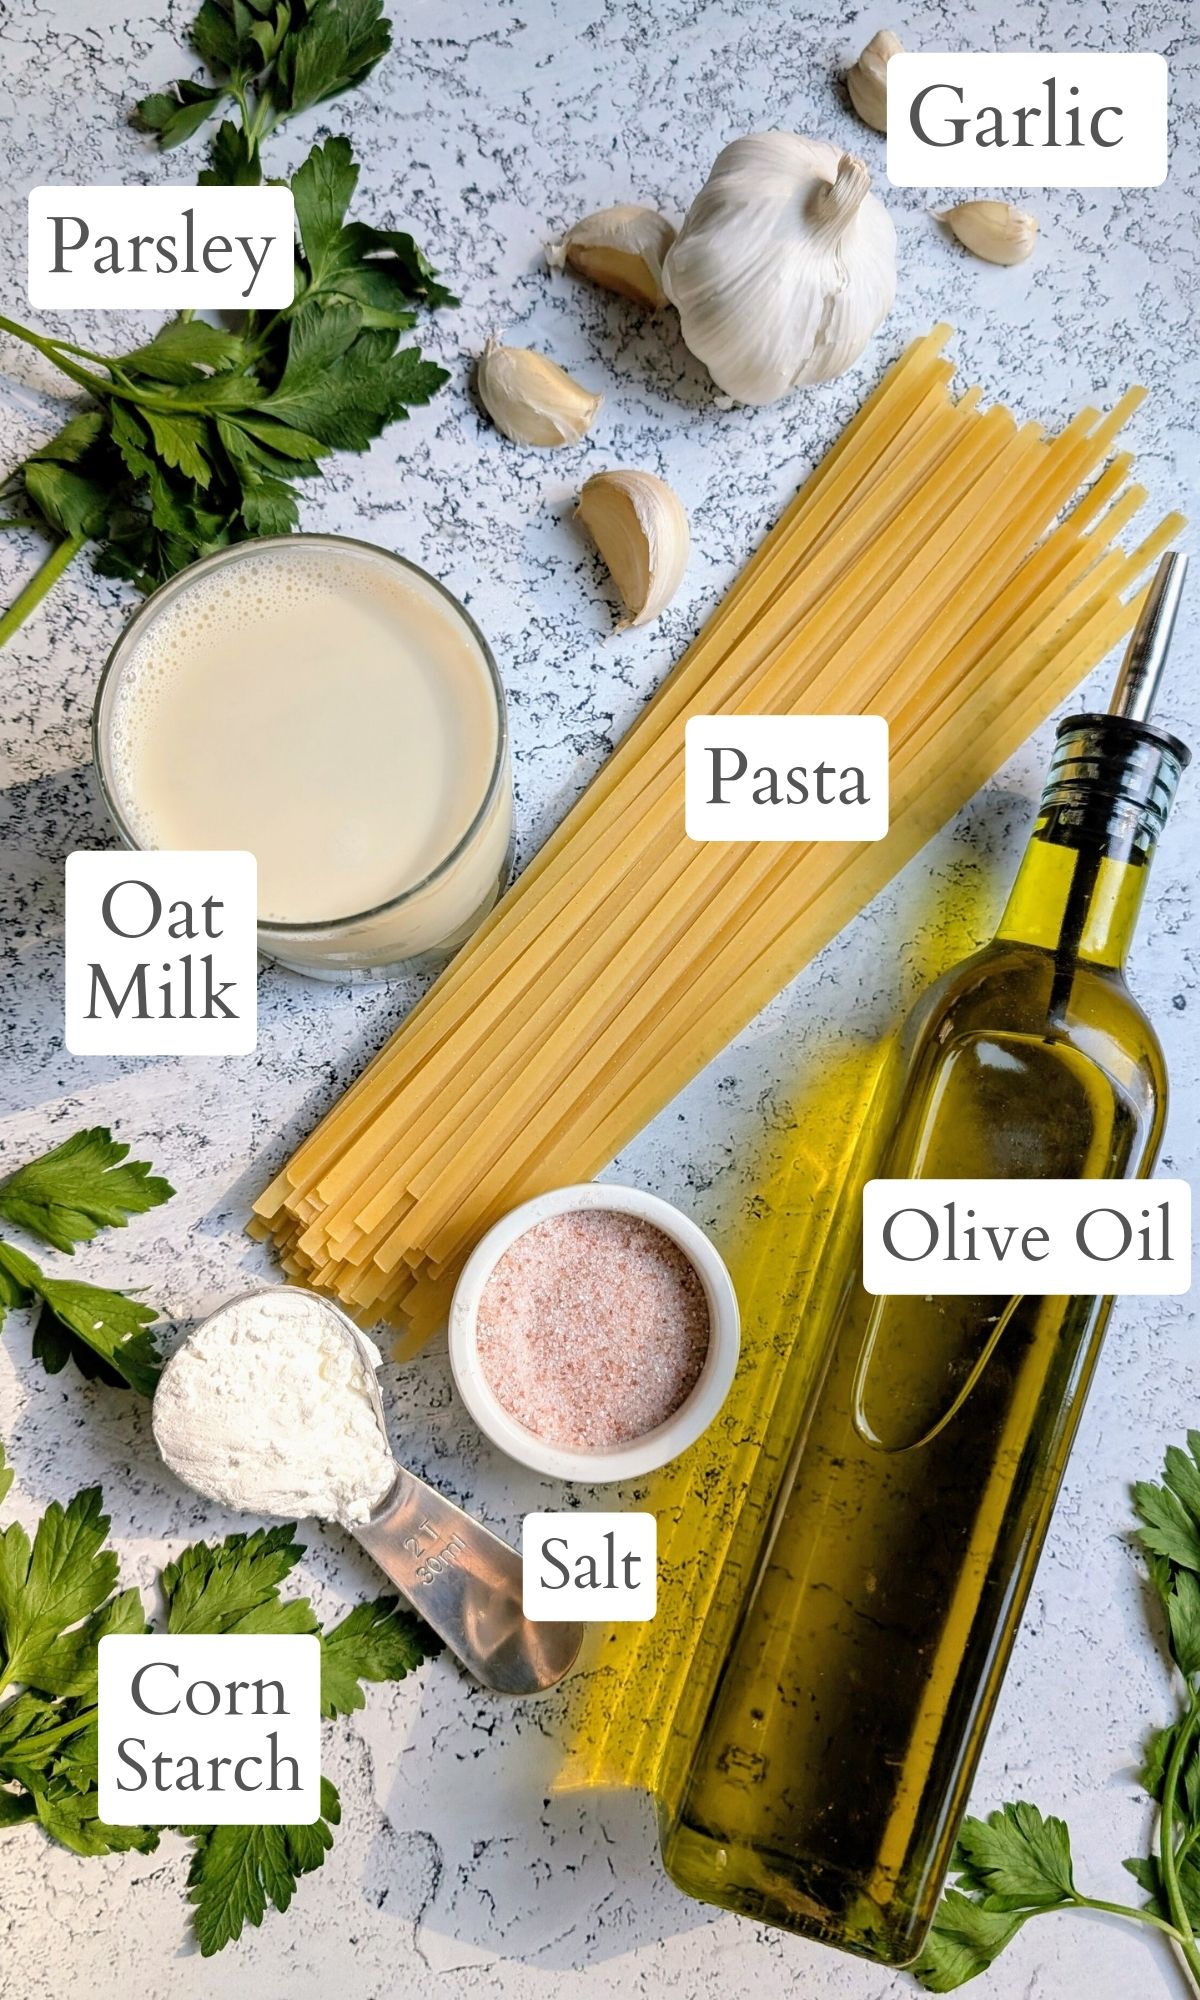 ingredients for oat milk alfredo like fettuccine pasta, olive oil, oat milk, salt, garlic, fresh parsley, and corn starch to thicken the sauce.